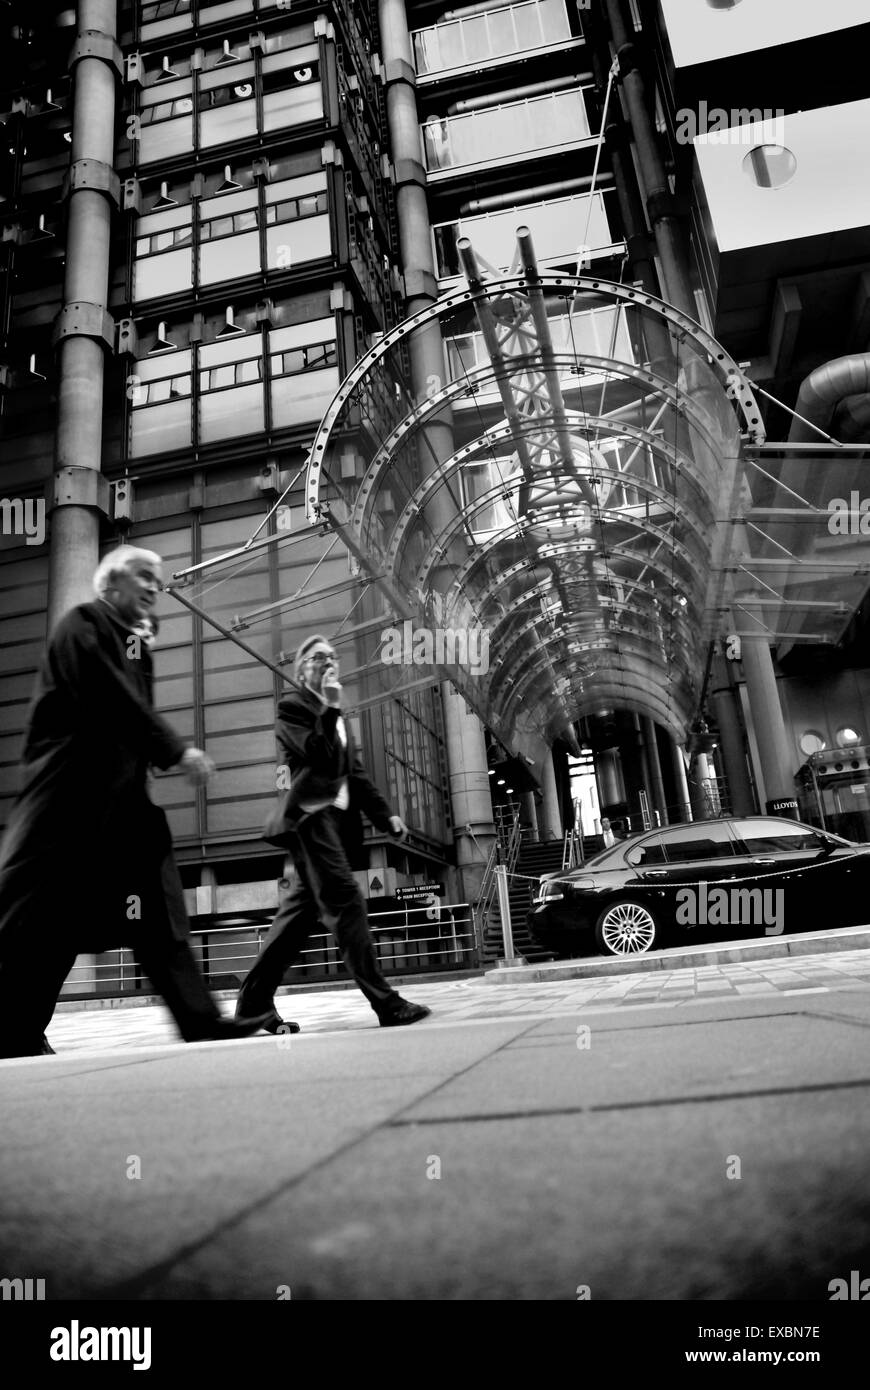 Bankers outside Lloyds Register, The City of London Stock Photo